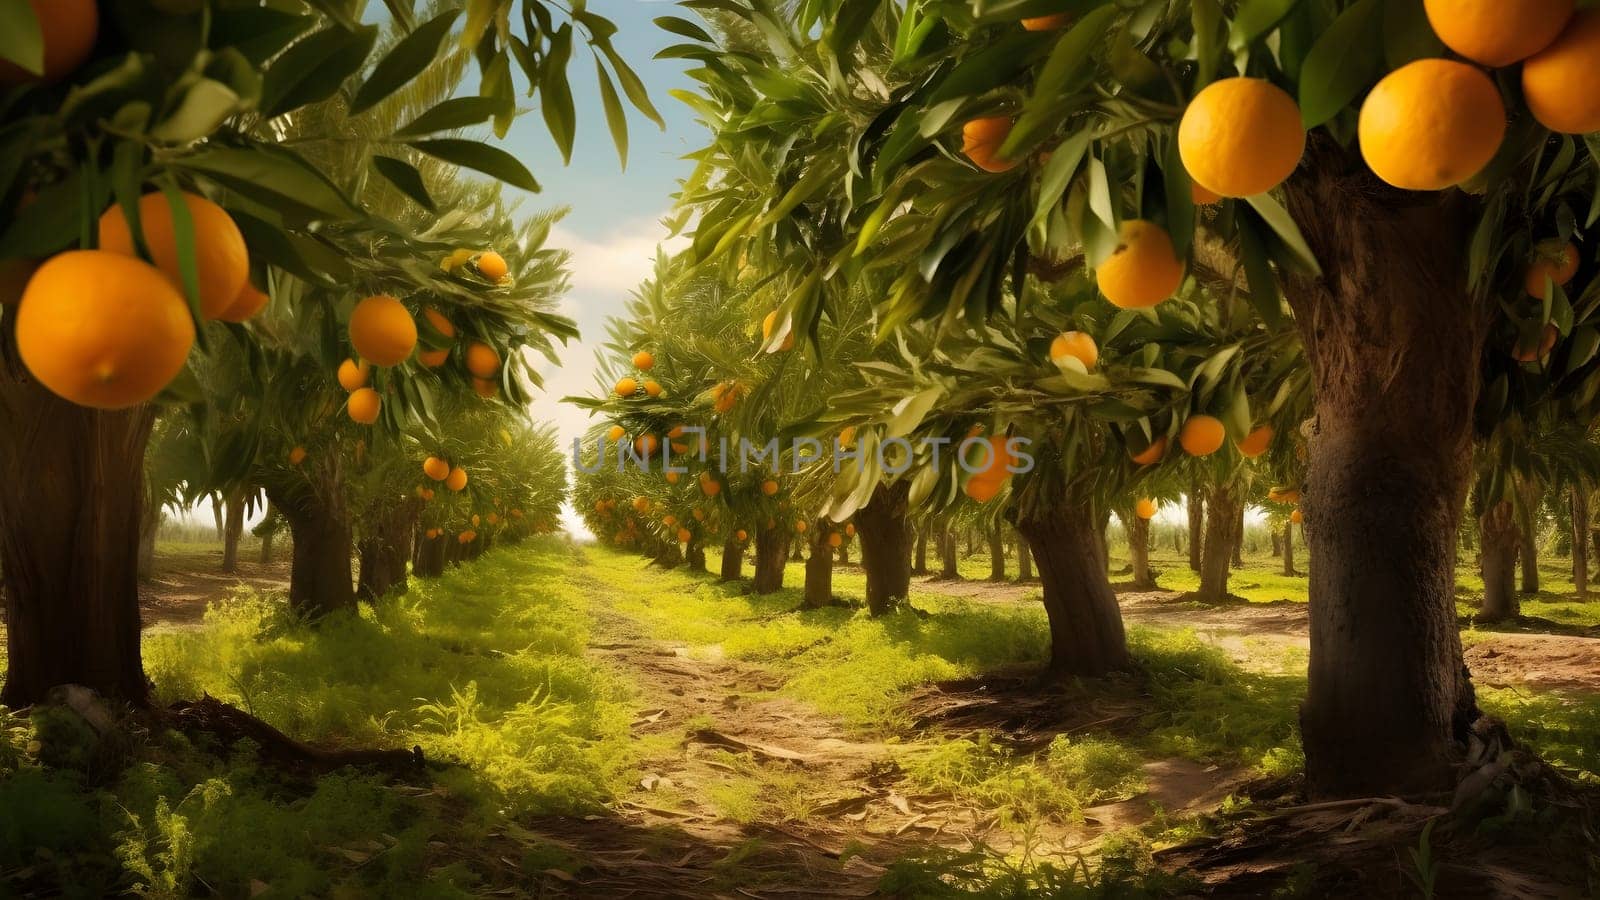 Oranges Ripening at Agriculture Farm at sunny summer day, neural network generated photorealistic image by z1b